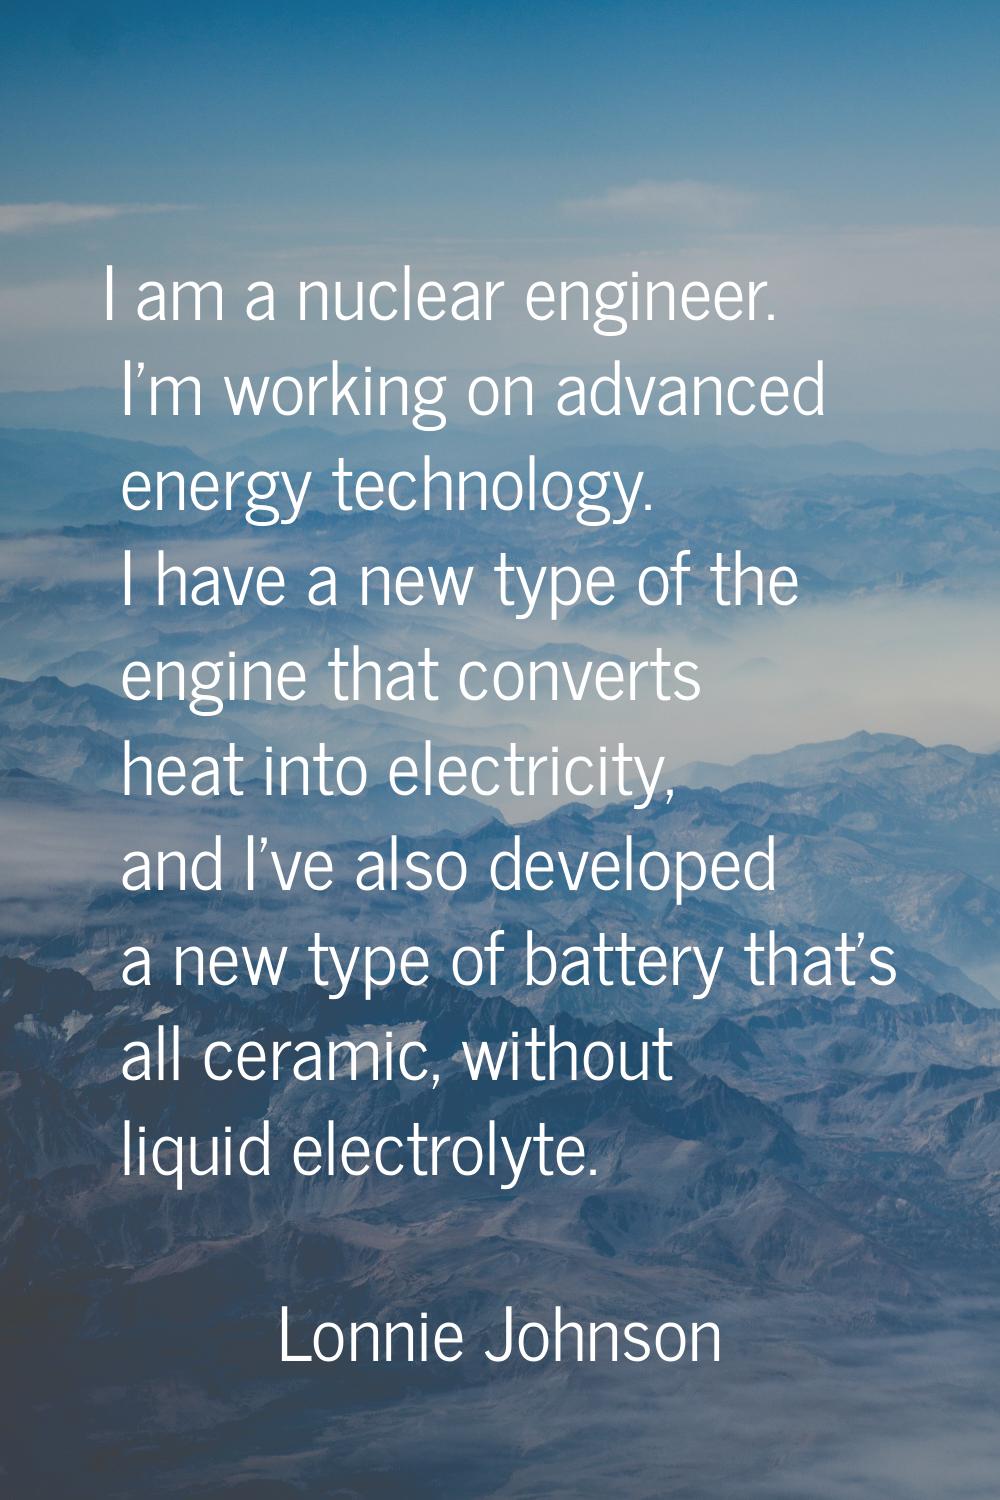 I am a nuclear engineer. I'm working on advanced energy technology. I have a new type of the engine